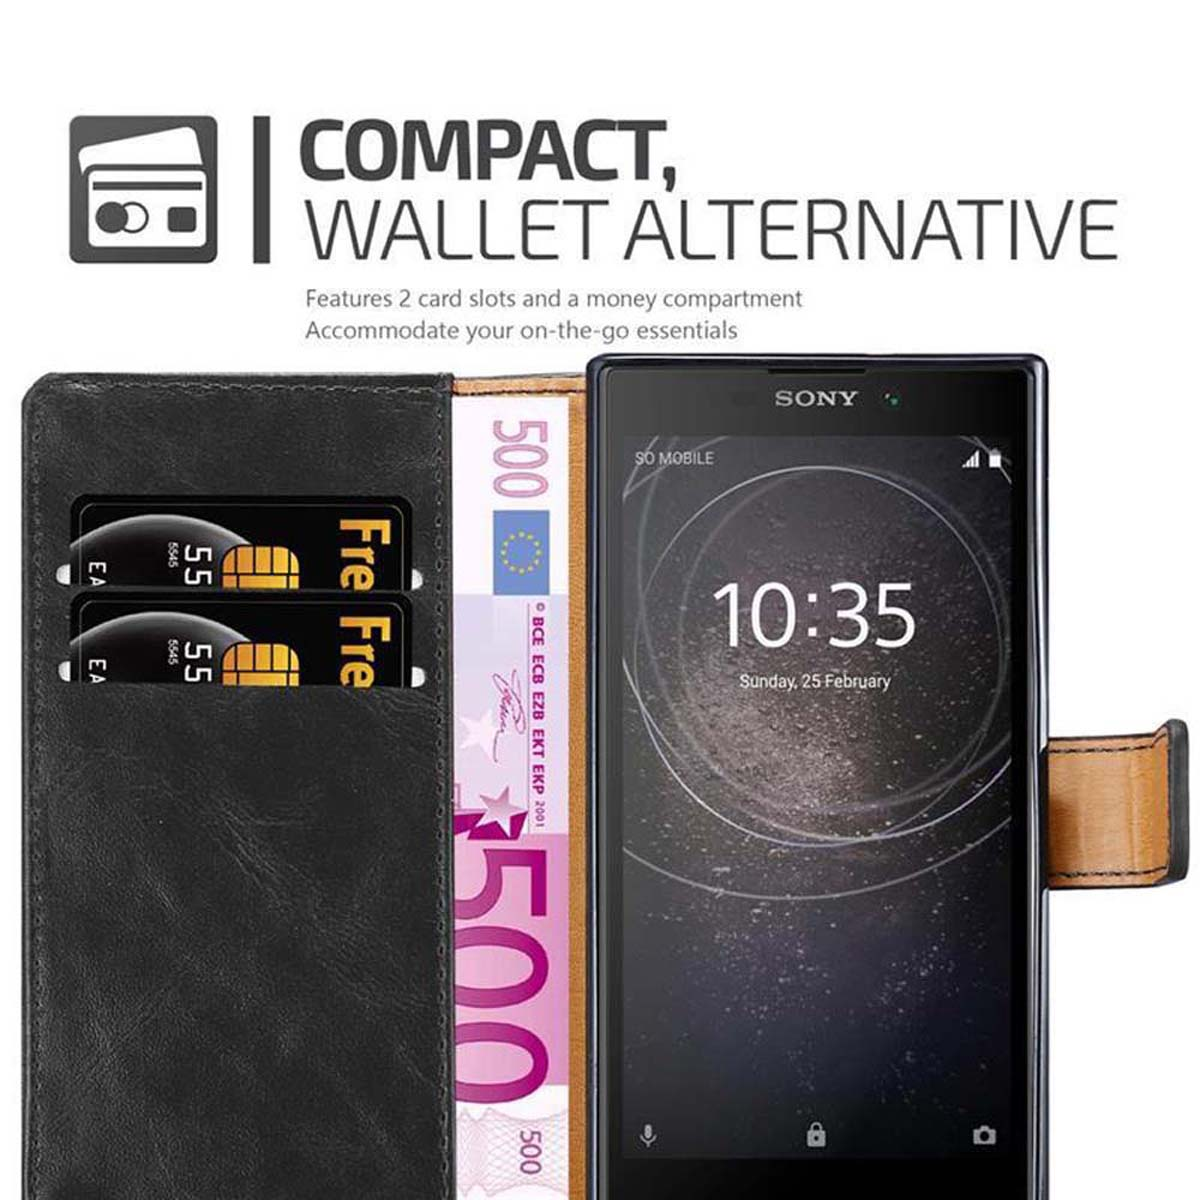 GRAPHIT Luxury Style, SCHWARZ Xperia Hülle Bookcover, L2, Book Sony, CADORABO